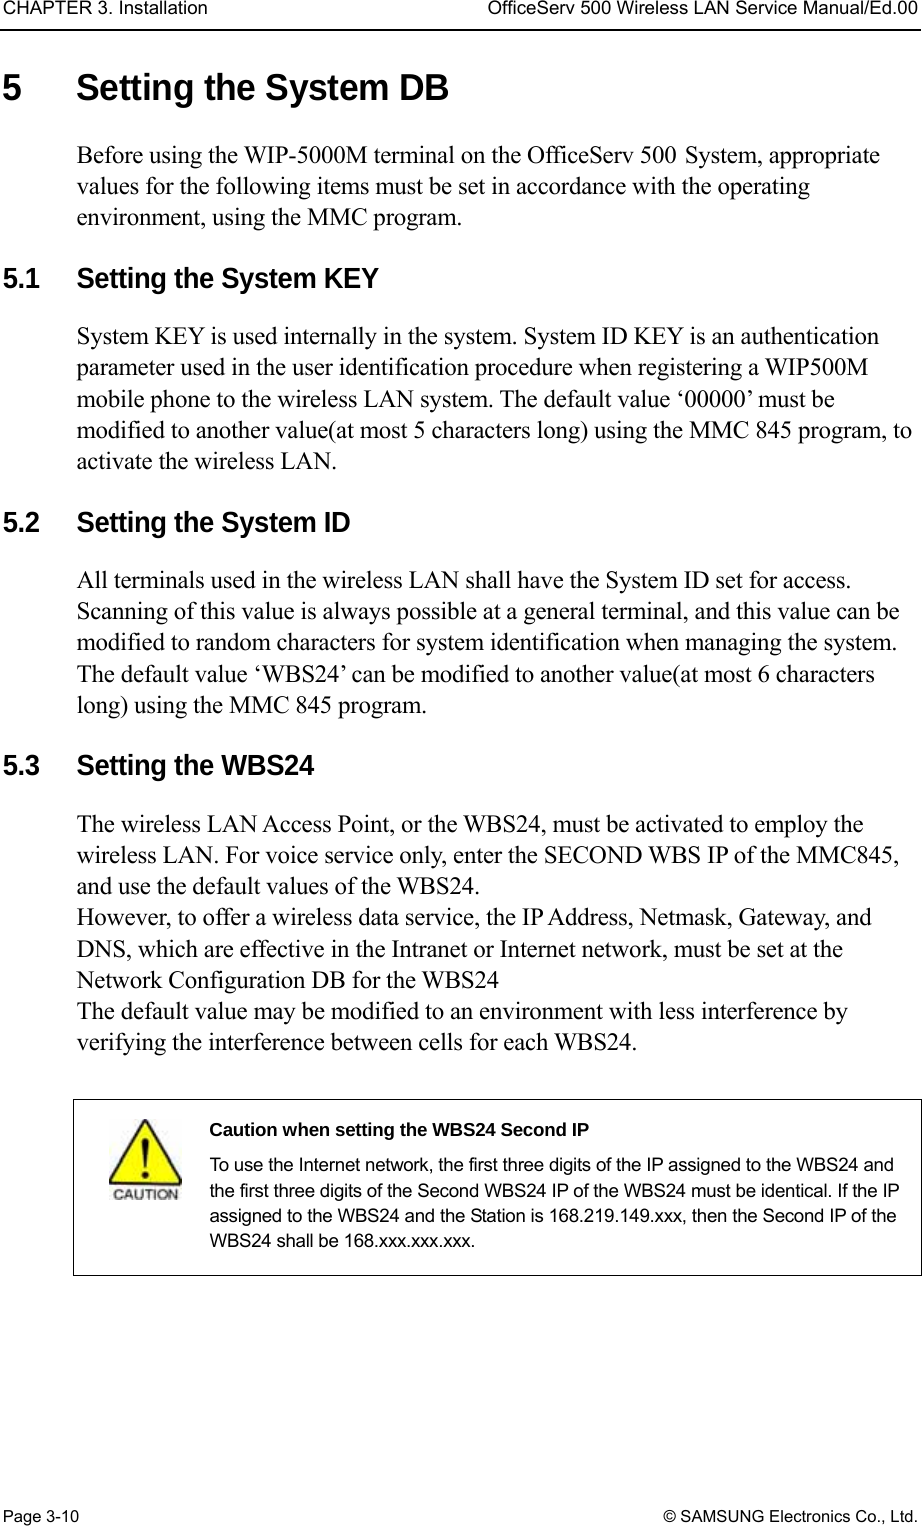 CHAPTER 3. Installation  OfficeServ 500 Wireless LAN Service Manual/Ed.00 Page 3-10 © SAMSUNG Electronics Co., Ltd. 5  Setting the System DB Before using the WIP-5000M terminal on the OfficeServ 500 System, appropriate values for the following items must be set in accordance with the operating environment, using the MMC program.    5.1  Setting the System KEY   System KEY is used internally in the system. System ID KEY is an authentication parameter used in the user identification procedure when registering a WIP500M mobile phone to the wireless LAN system. The default value ‘00000’ must be modified to another value(at most 5 characters long) using the MMC 845 program, to activate the wireless LAN.    5.2  Setting the System ID All terminals used in the wireless LAN shall have the System ID set for access. Scanning of this value is always possible at a general terminal, and this value can be modified to random characters for system identification when managing the system. The default value ‘WBS24’ can be modified to another value(at most 6 characters long) using the MMC 845 program.    5.3  Setting the WBS24   The wireless LAN Access Point, or the WBS24, must be activated to employ the wireless LAN. For voice service only, enter the SECOND WBS IP of the MMC845, and use the default values of the WBS24.   However, to offer a wireless data service, the IP Address, Netmask, Gateway, and DNS, which are effective in the Intranet or Internet network, must be set at the Network Configuration DB for the WBS24   The default value may be modified to an environment with less interference by verifying the interference between cells for each WBS24.   Caution when setting the WBS24 Second IP   To use the Internet network, the first three digits of the IP assigned to the WBS24 and the first three digits of the Second WBS24 IP of the WBS24 must be identical. If the IP assigned to the WBS24 and the Station is 168.219.149.xxx, then the Second IP of the WBS24 shall be 168.xxx.xxx.xxx.  